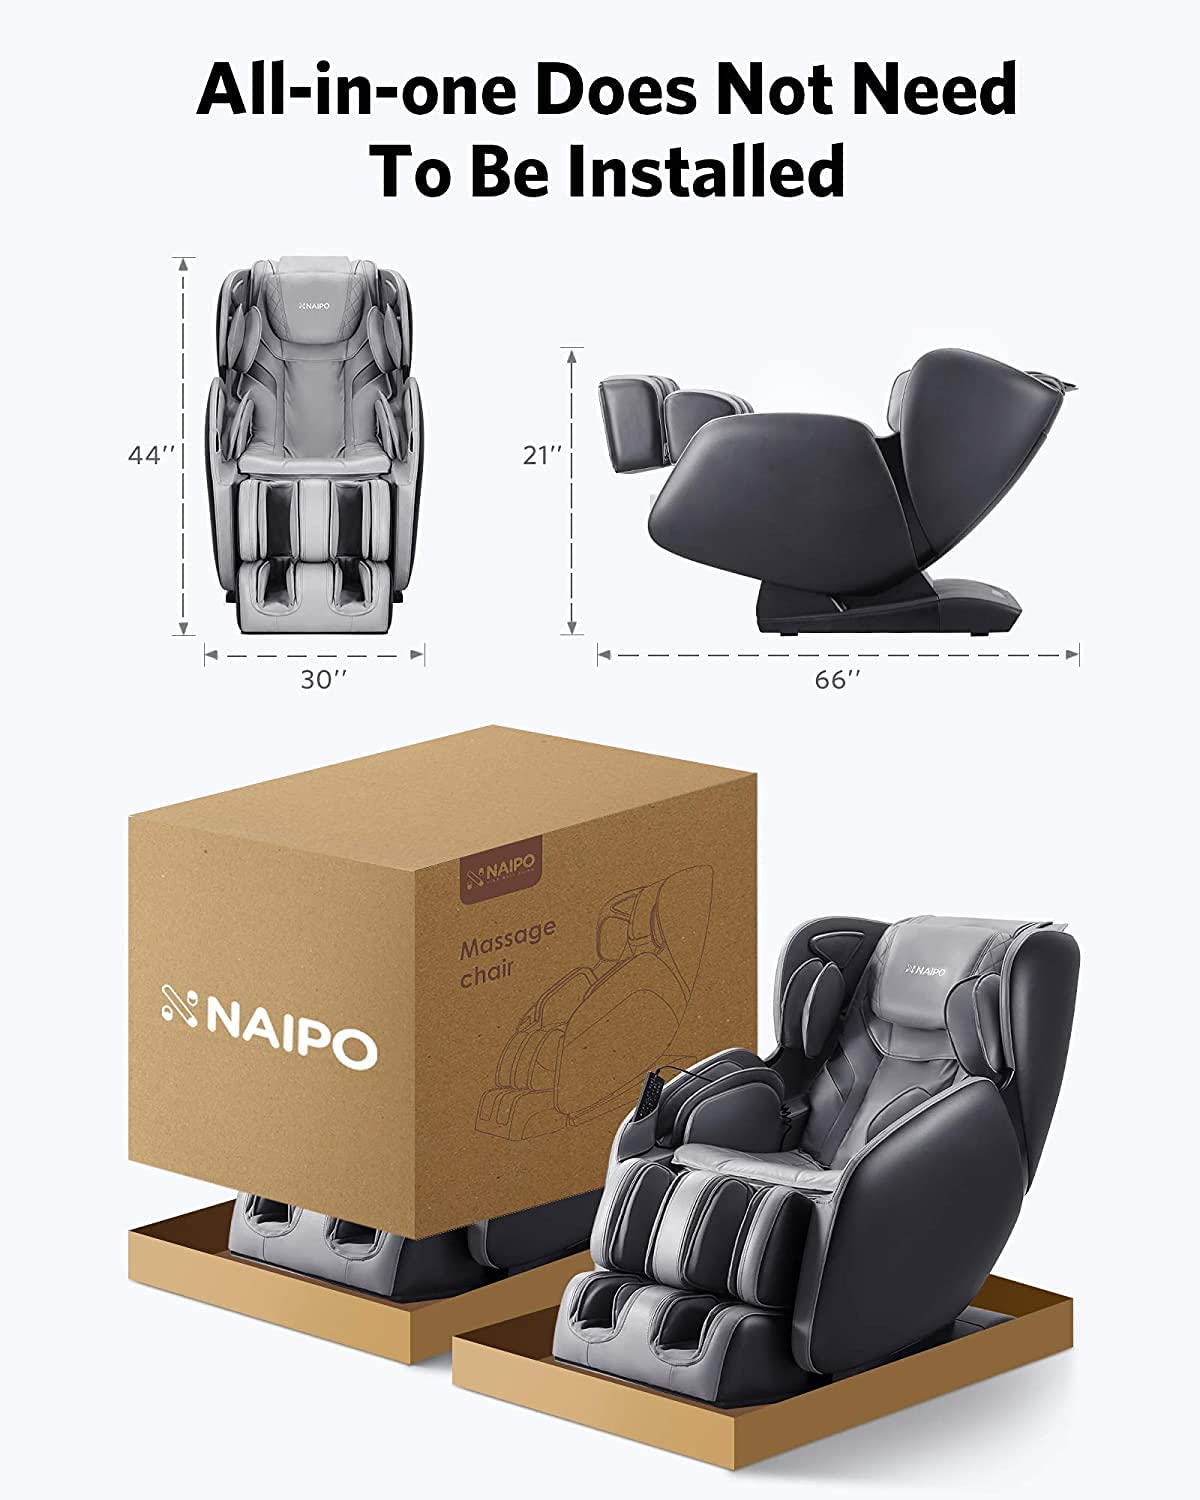 Load image into Gallery viewer, Naipo Massage Chair Recliner Zero Gravity Shiatsu Kneading Full Body Back Foot Roller Massager with Heat, SL Track Yoga Stretch Bluetooth Audio for Home and Office - NAIPO
